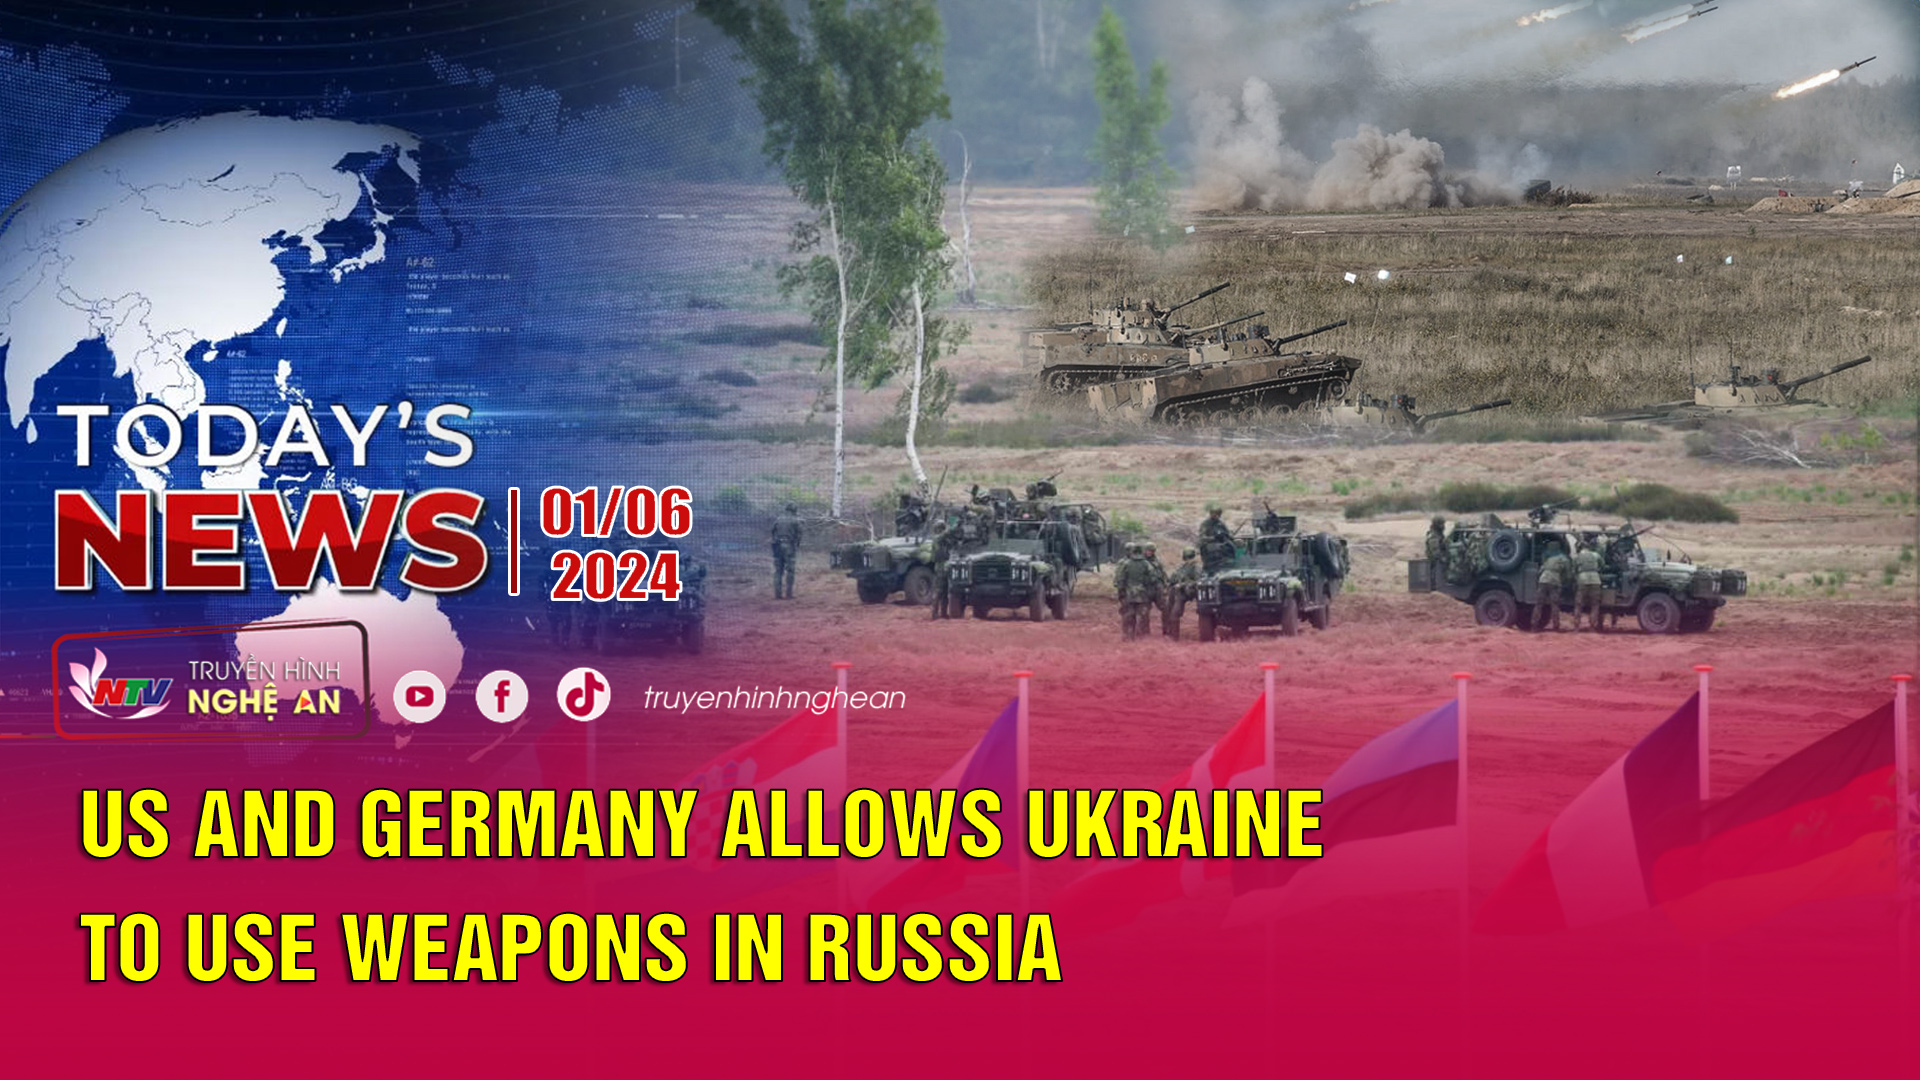 Today's News 01/06/2024: US and Germany allows Ukraine to use weapons in Russia